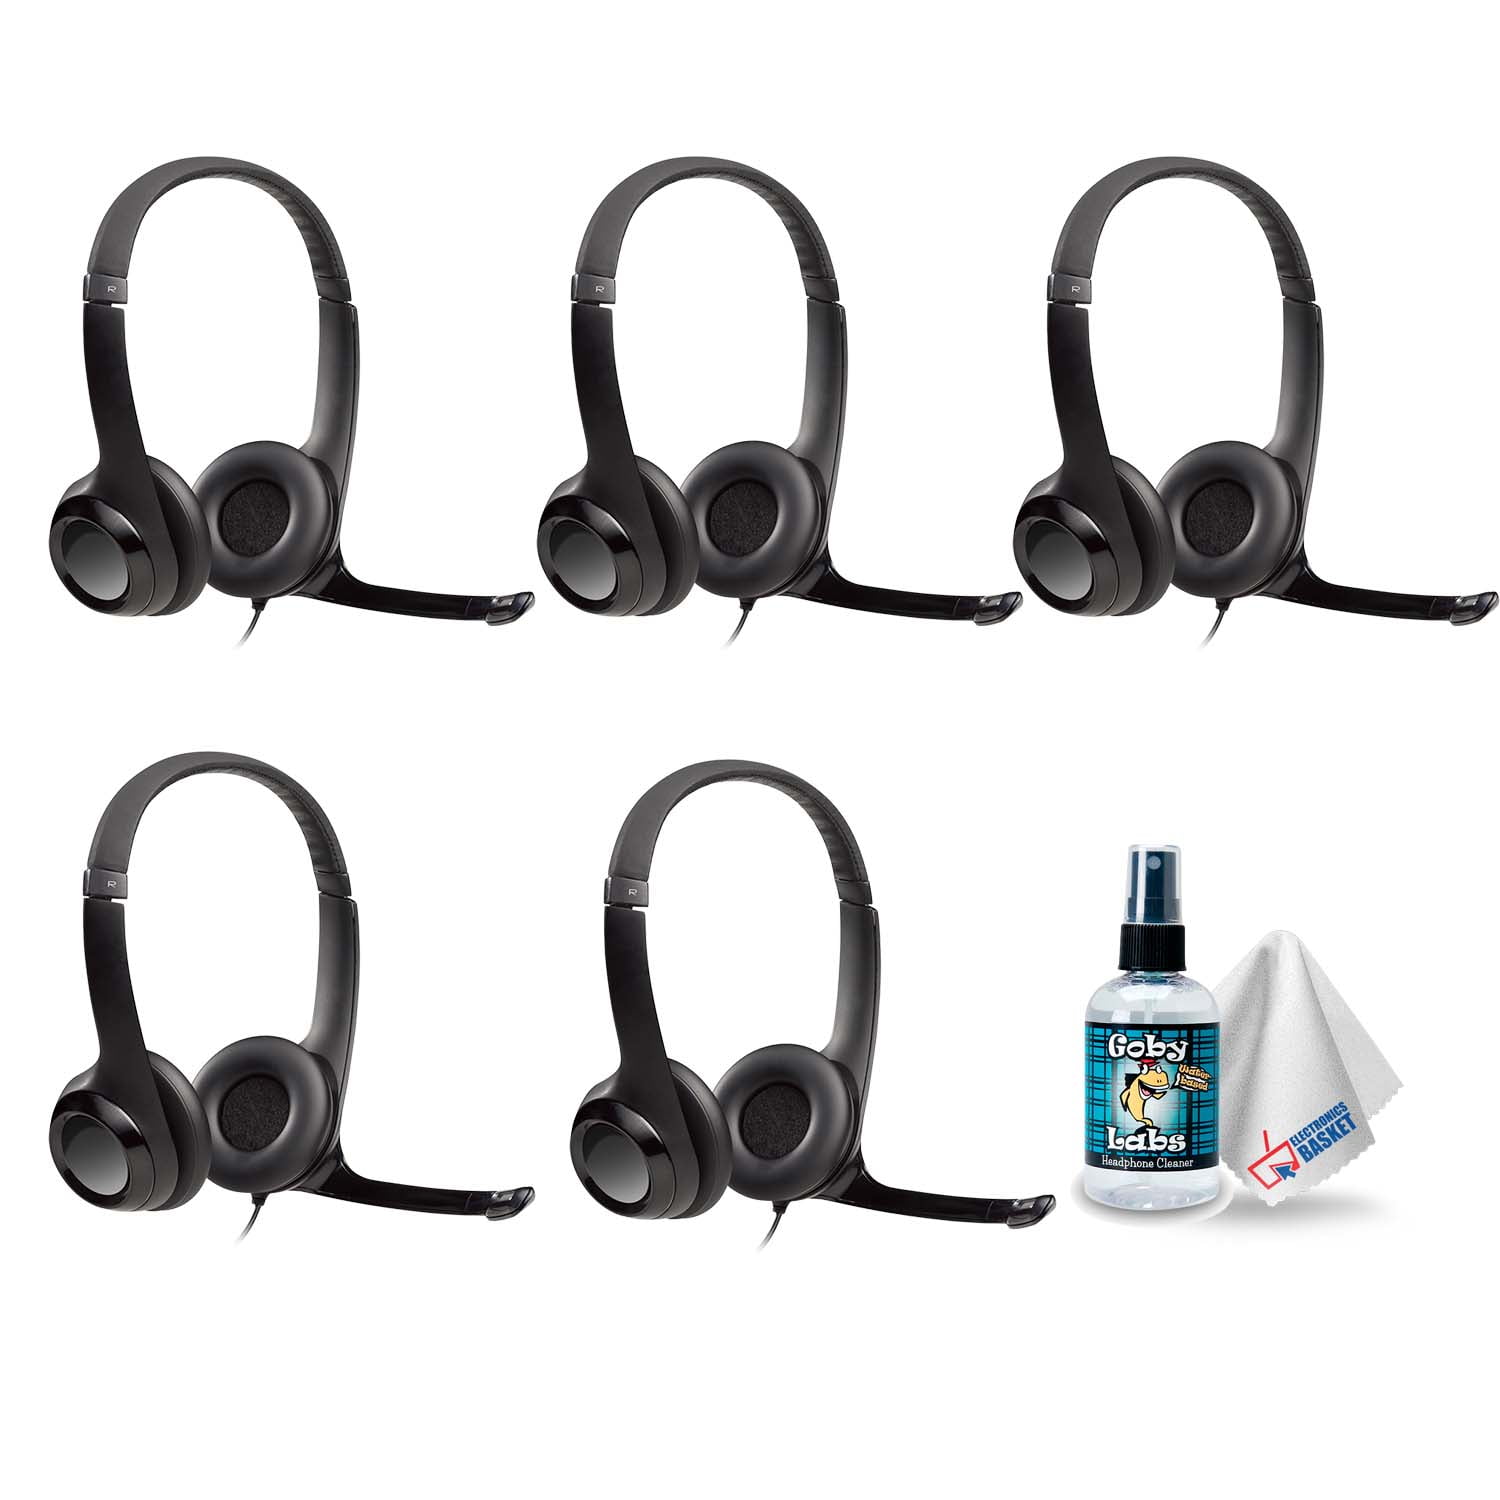 Logitech H390 USB Computer Headset with Noise Cancelling Mic in